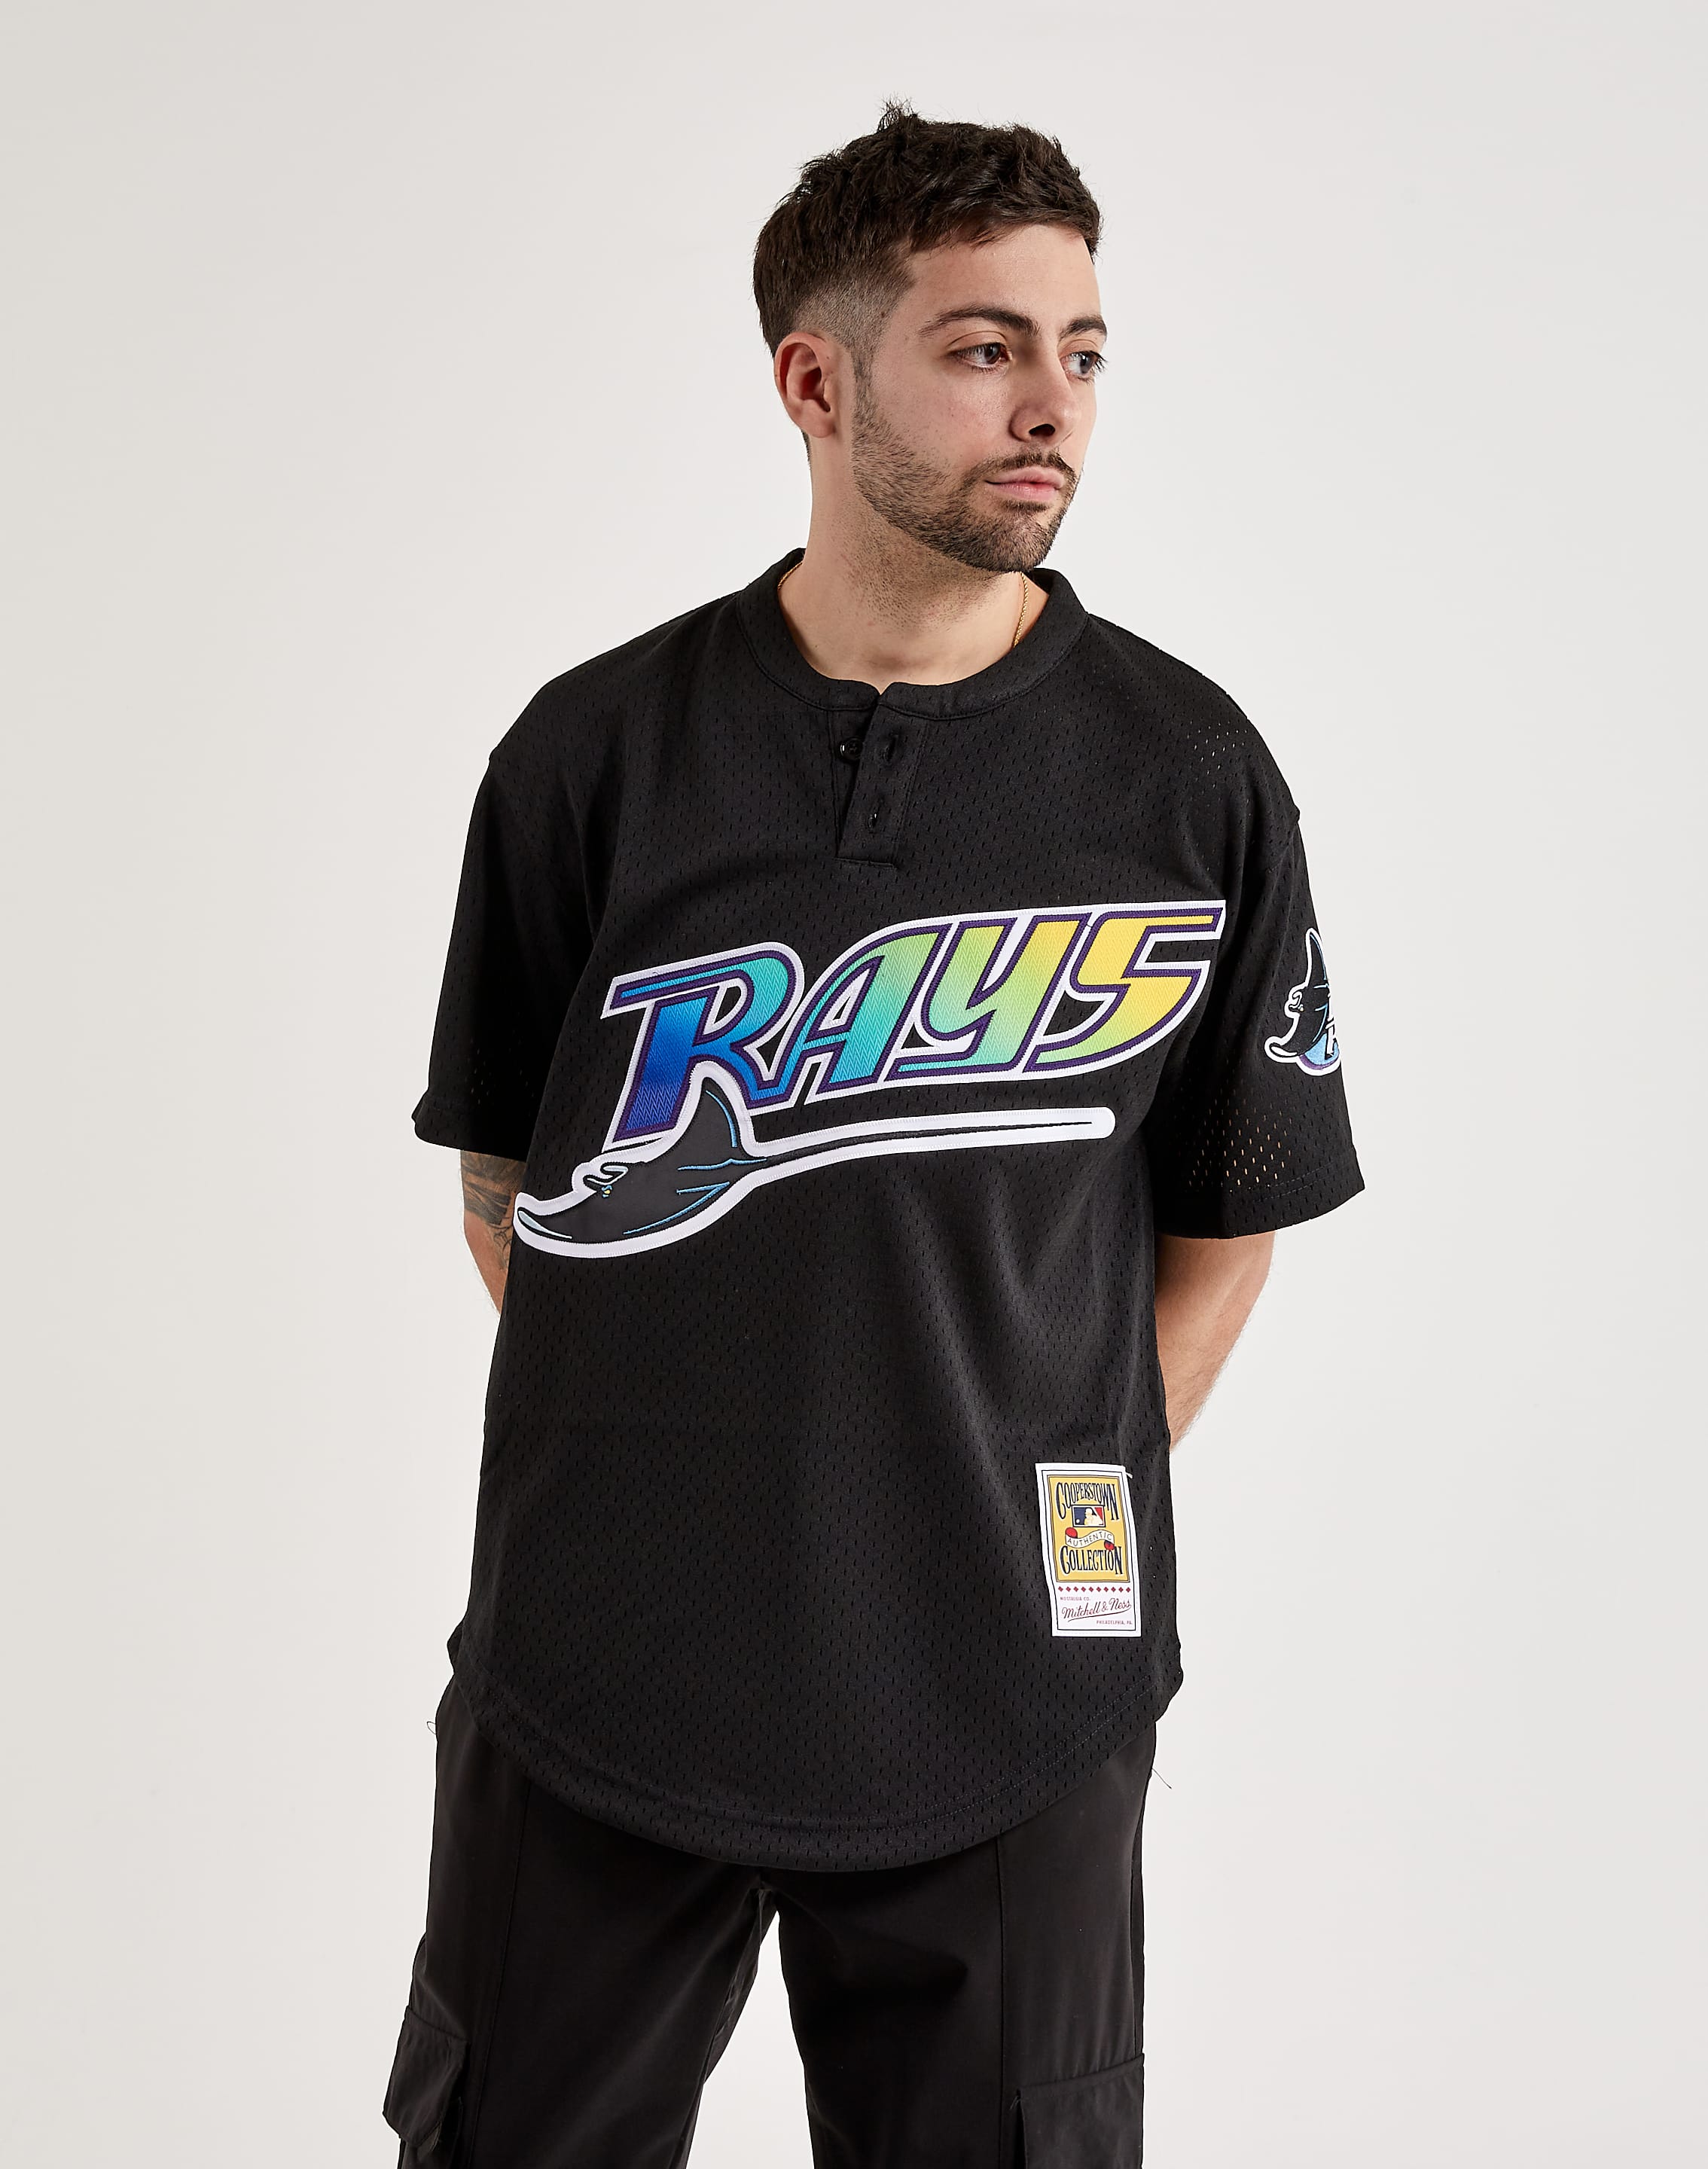 Nike Men's Tampa Bay Rays Official Cooperstown Jersey